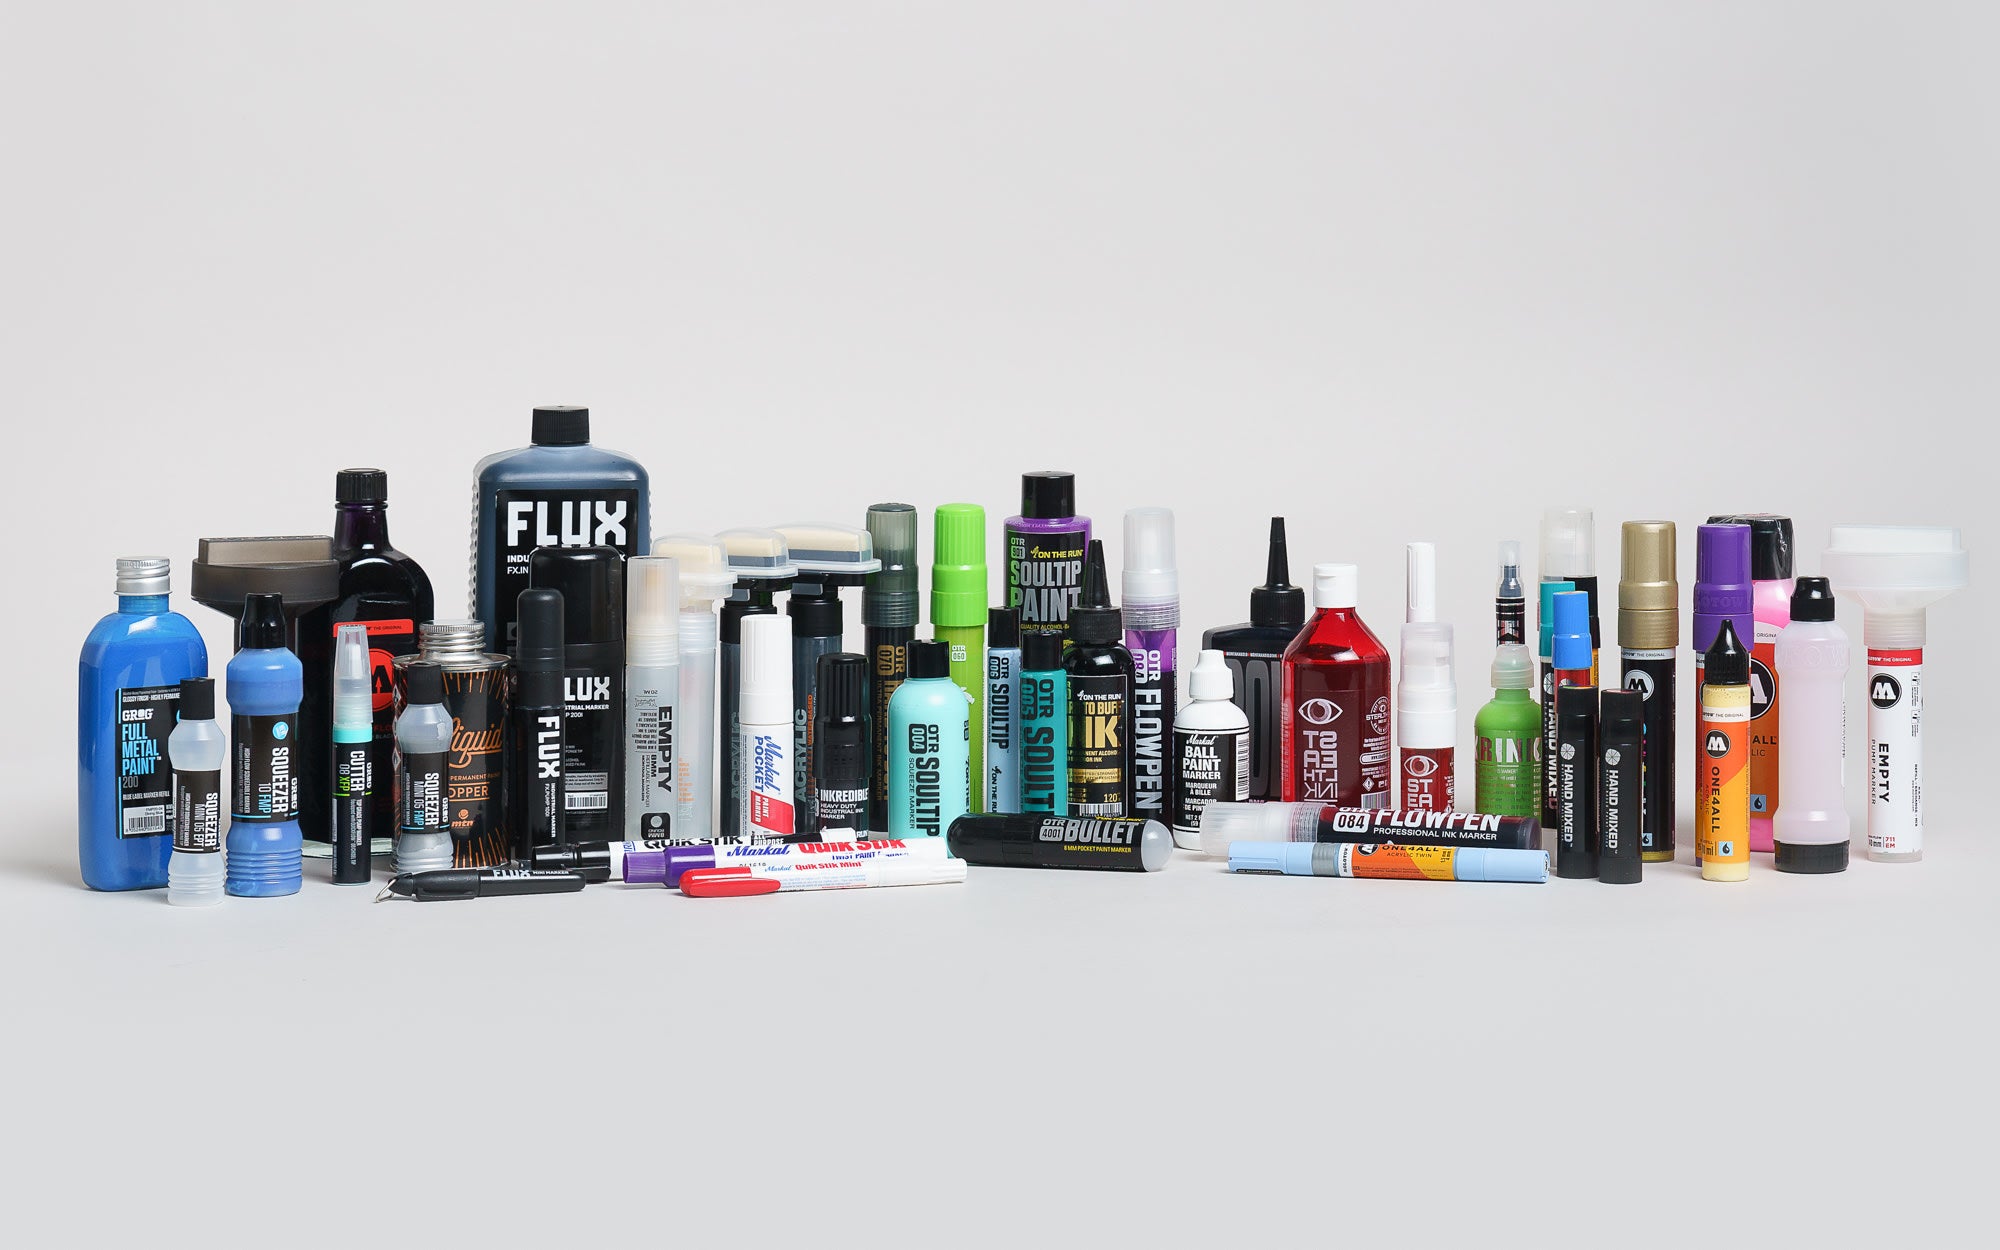  A colorful assortment of graffiti products!